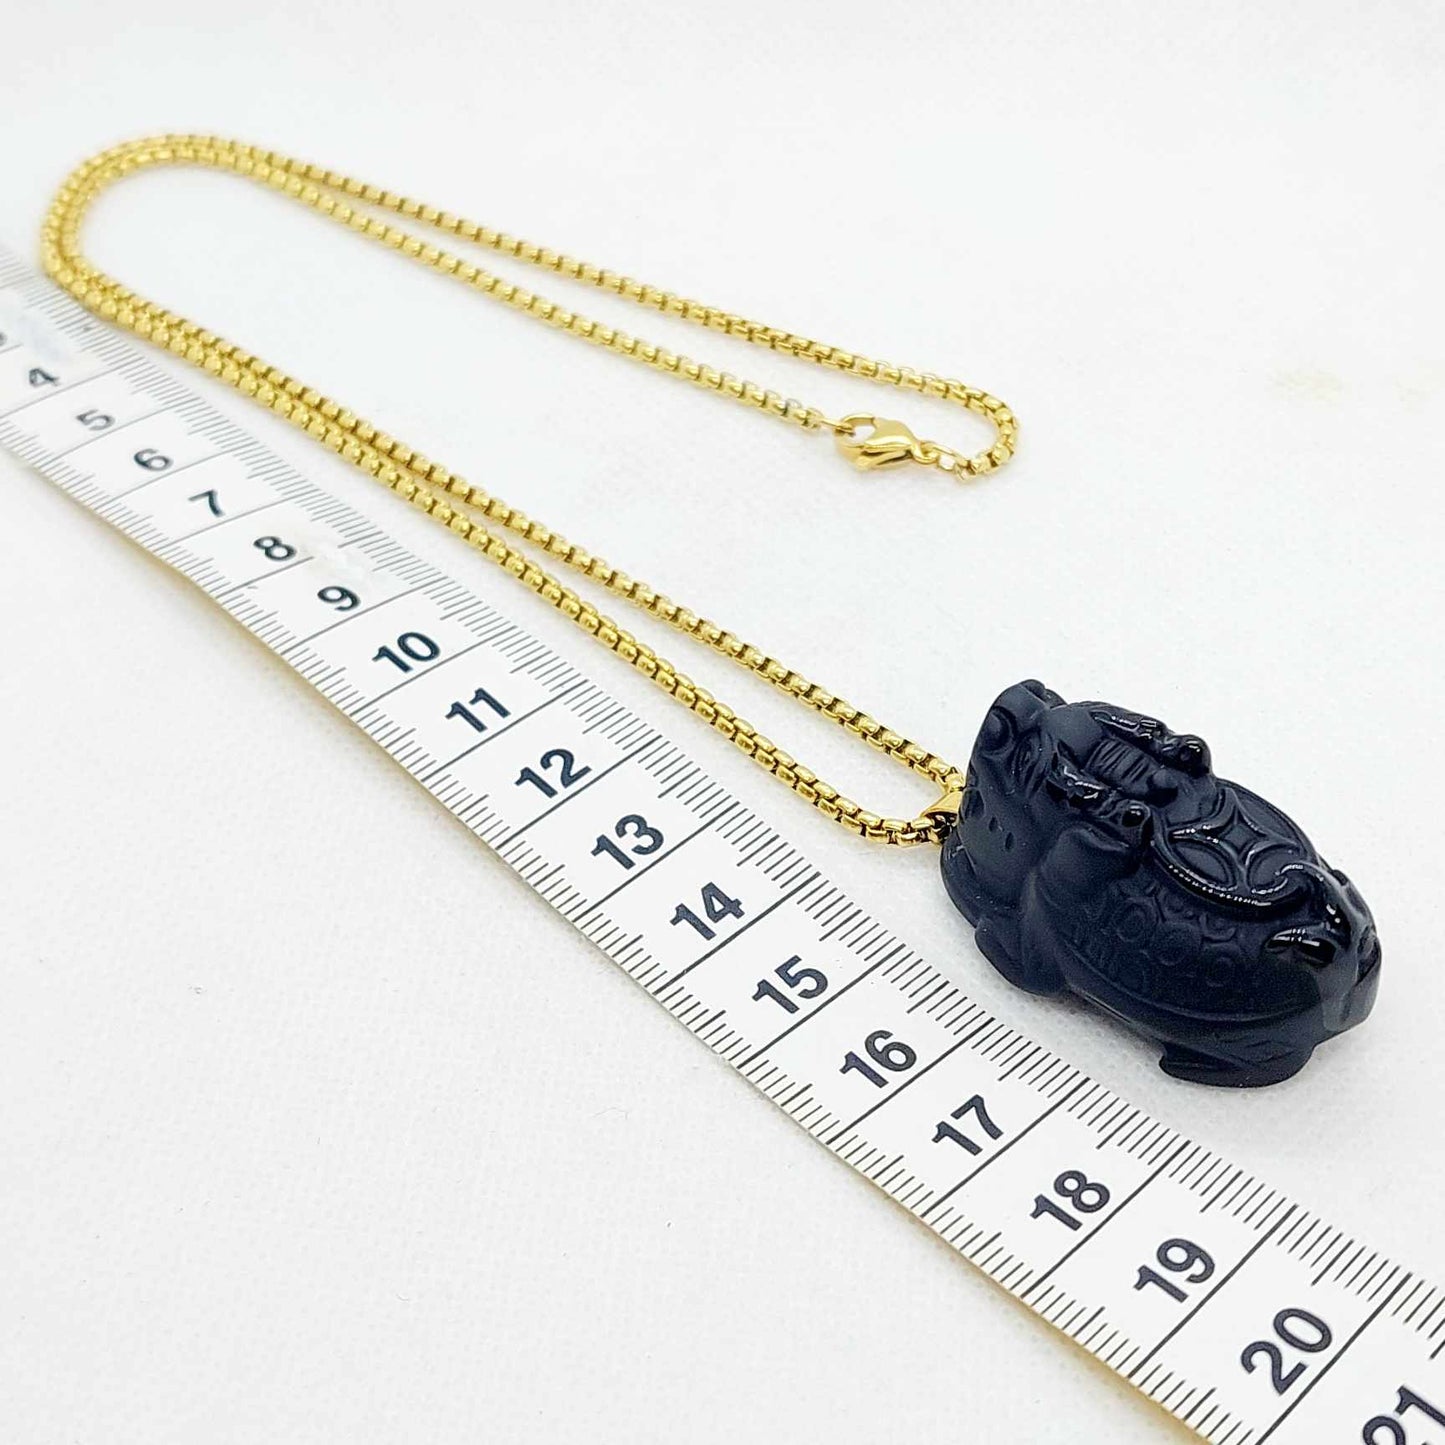 Natural Obsidian Dragon Turtle Pendant with Gold Plated Stainless Steel Chain Necklace